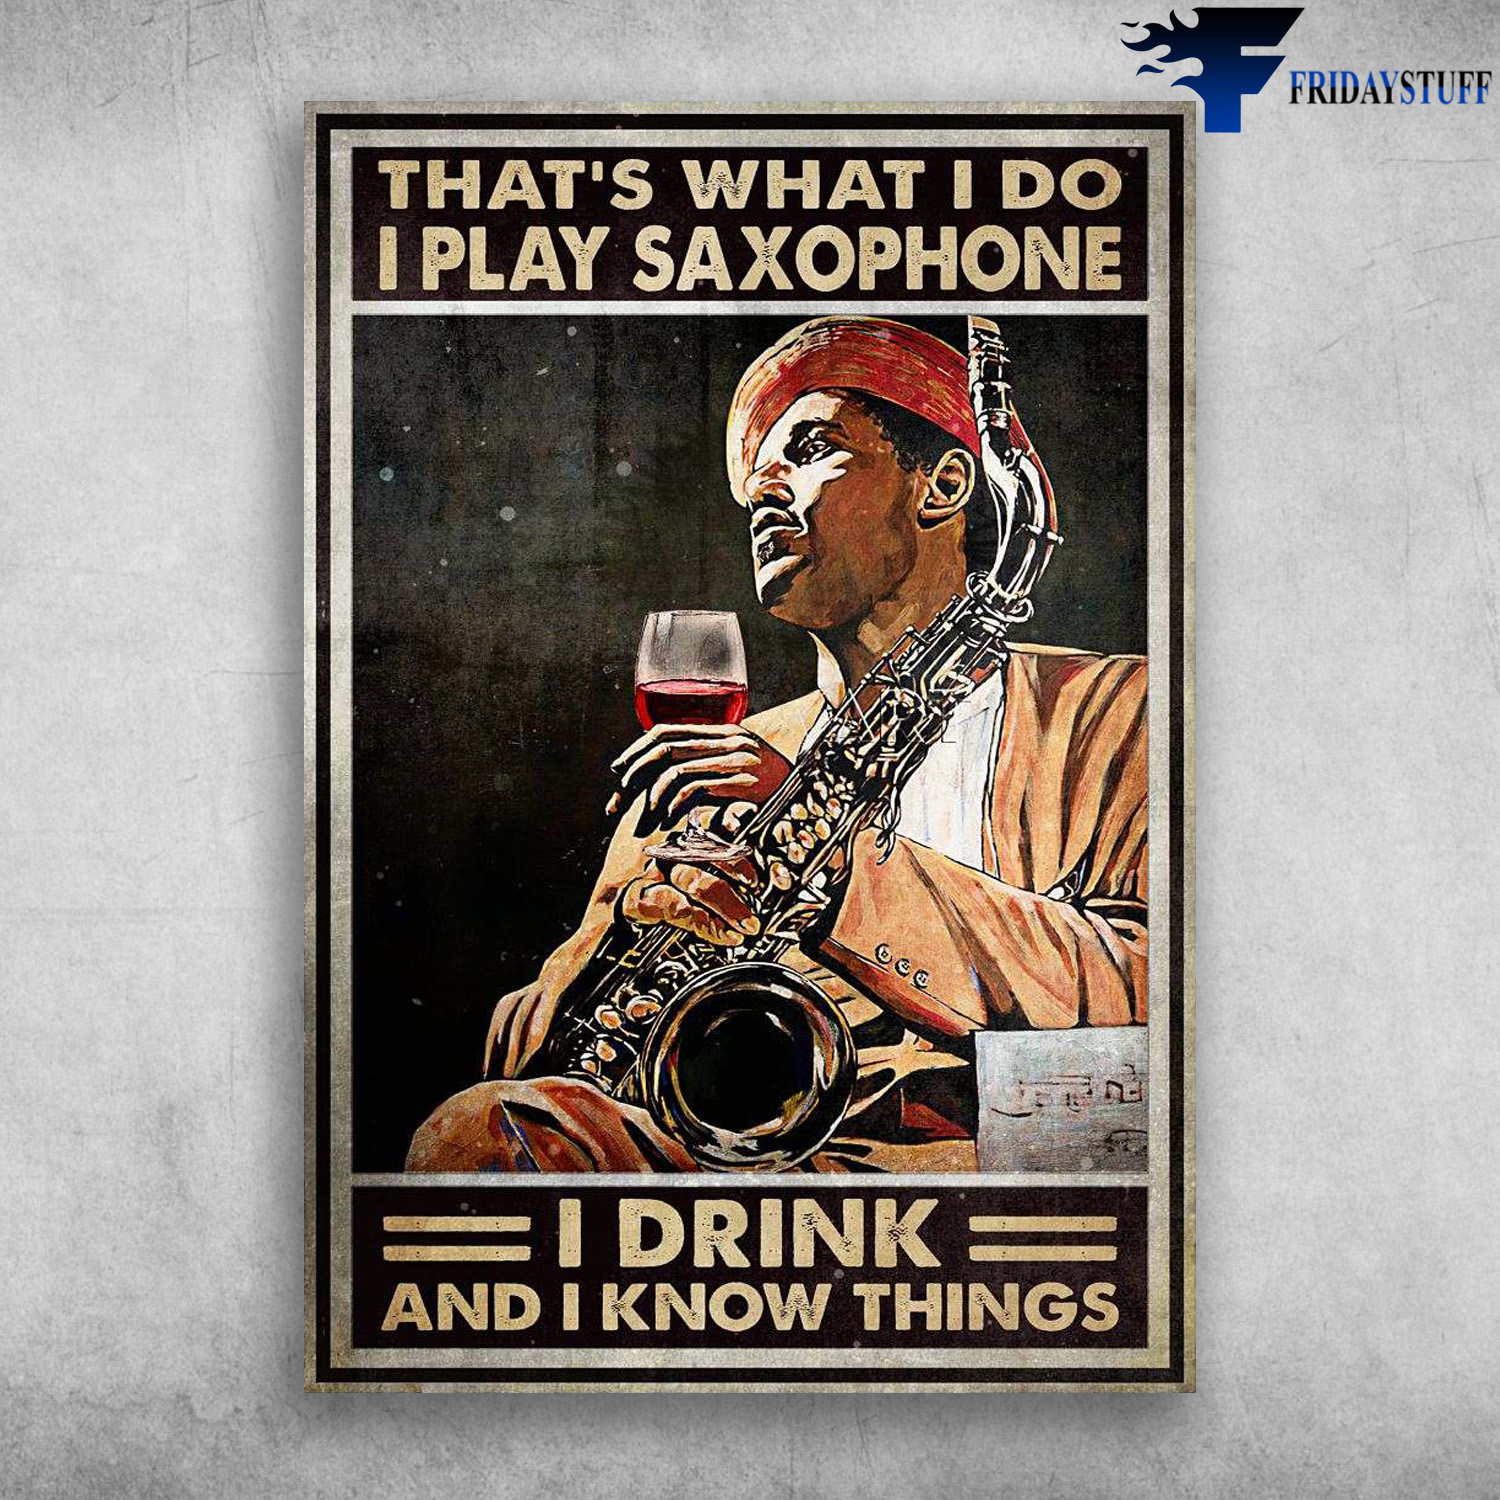 Black Man, Saxophone And Wine - That's What I Do, I Play Saxophone, I Drink, And I Know Things